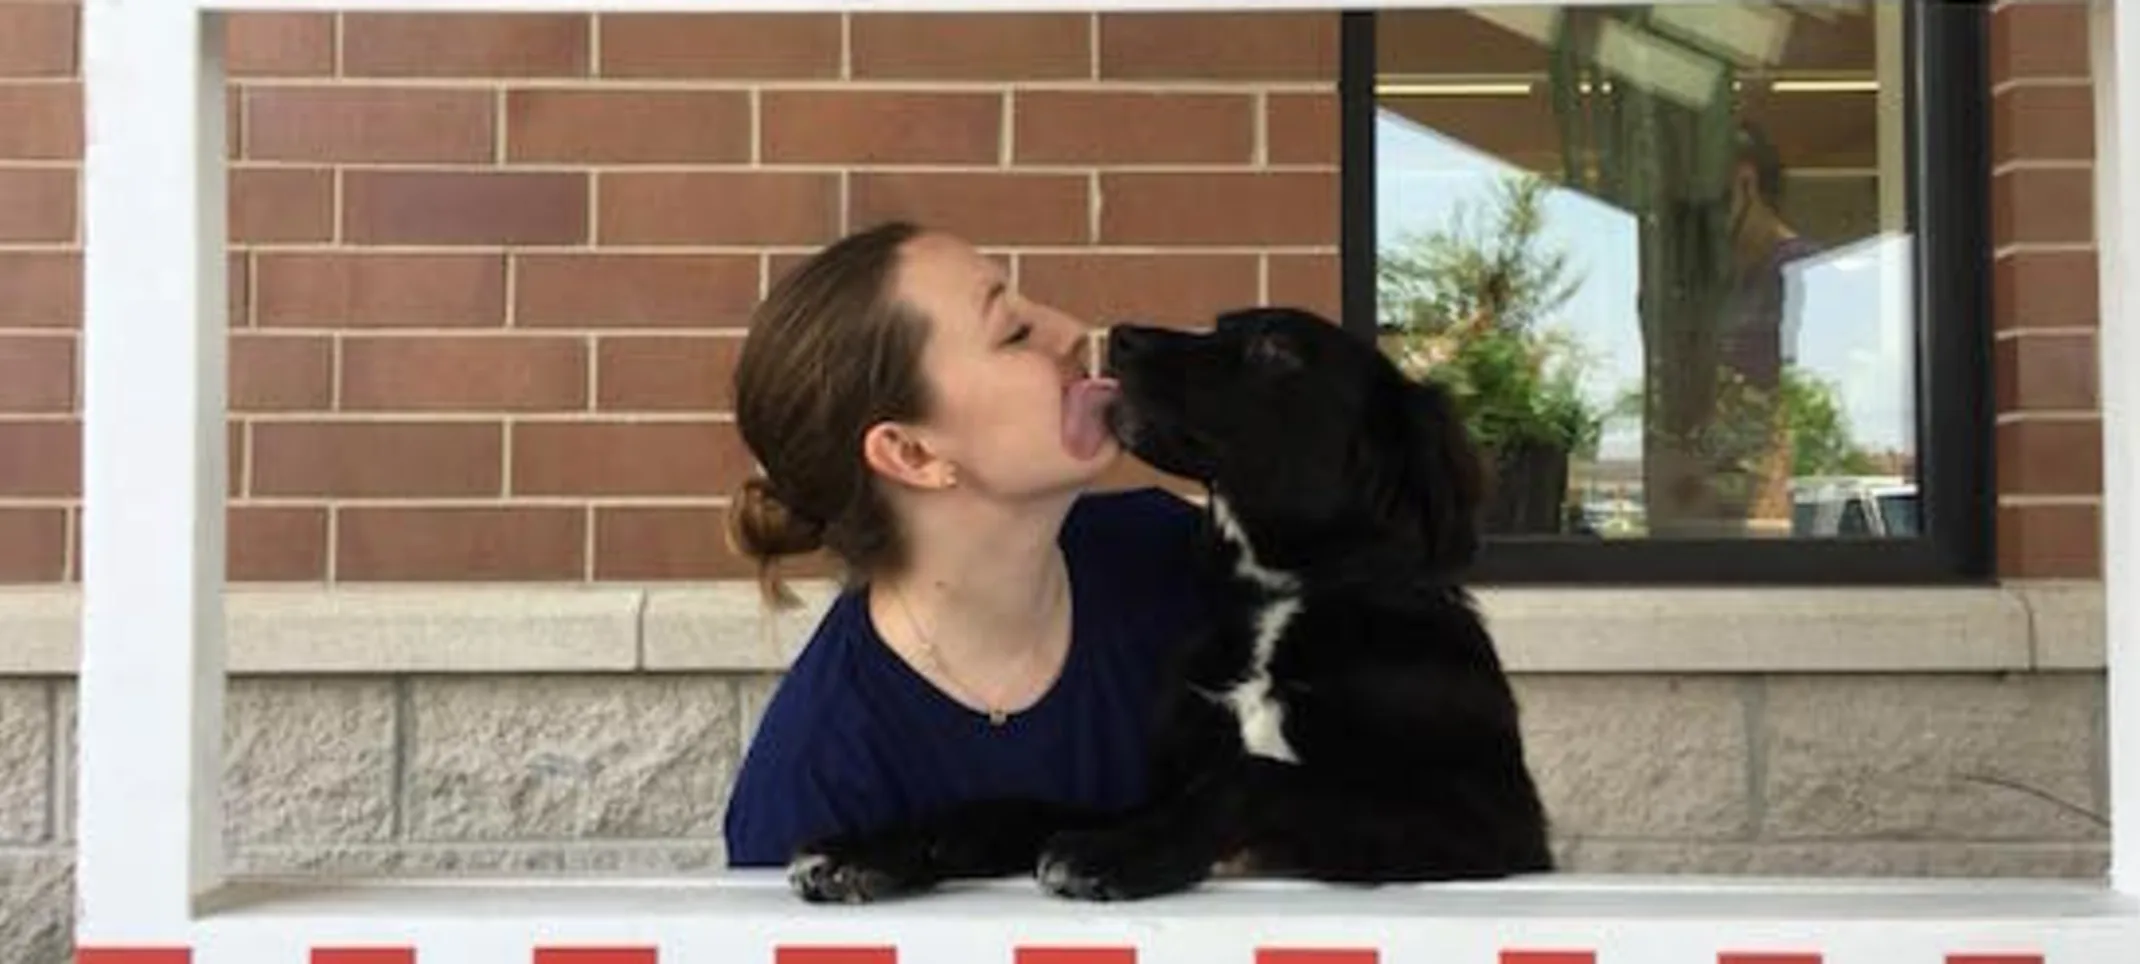 Staff and rescue dog kissing booth